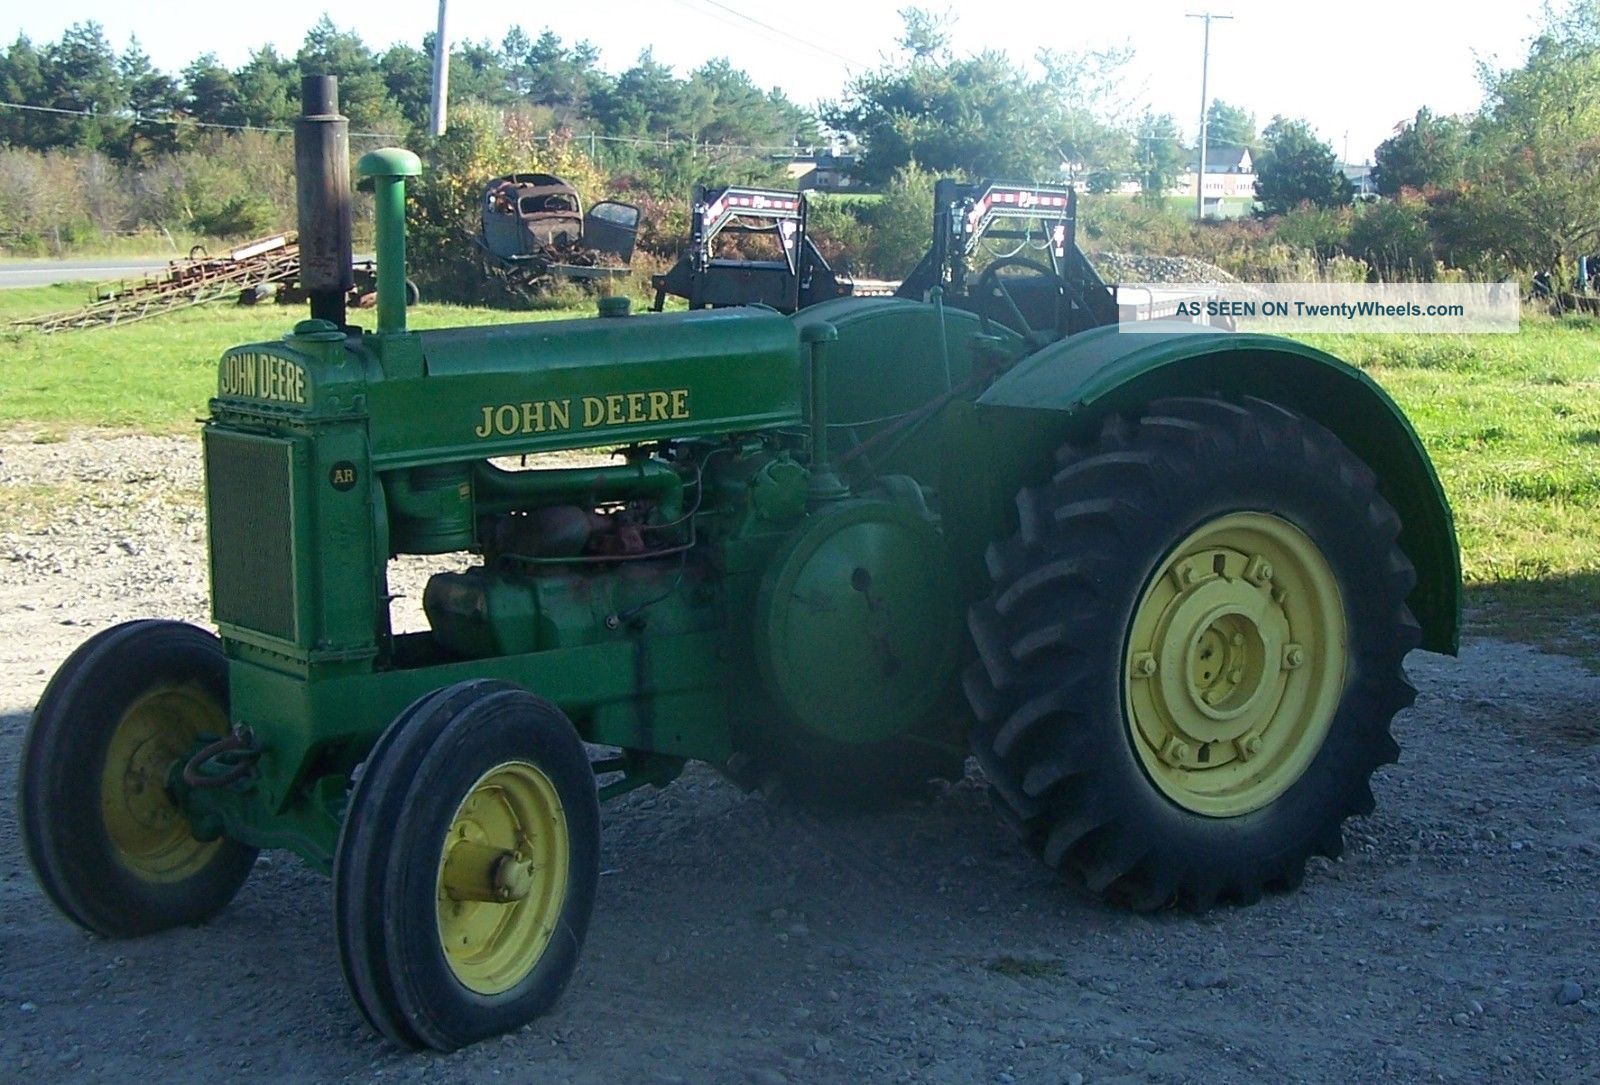 1939 John Deere Ar Unstyled Tractor Antique Ie - - Ao Br Bo